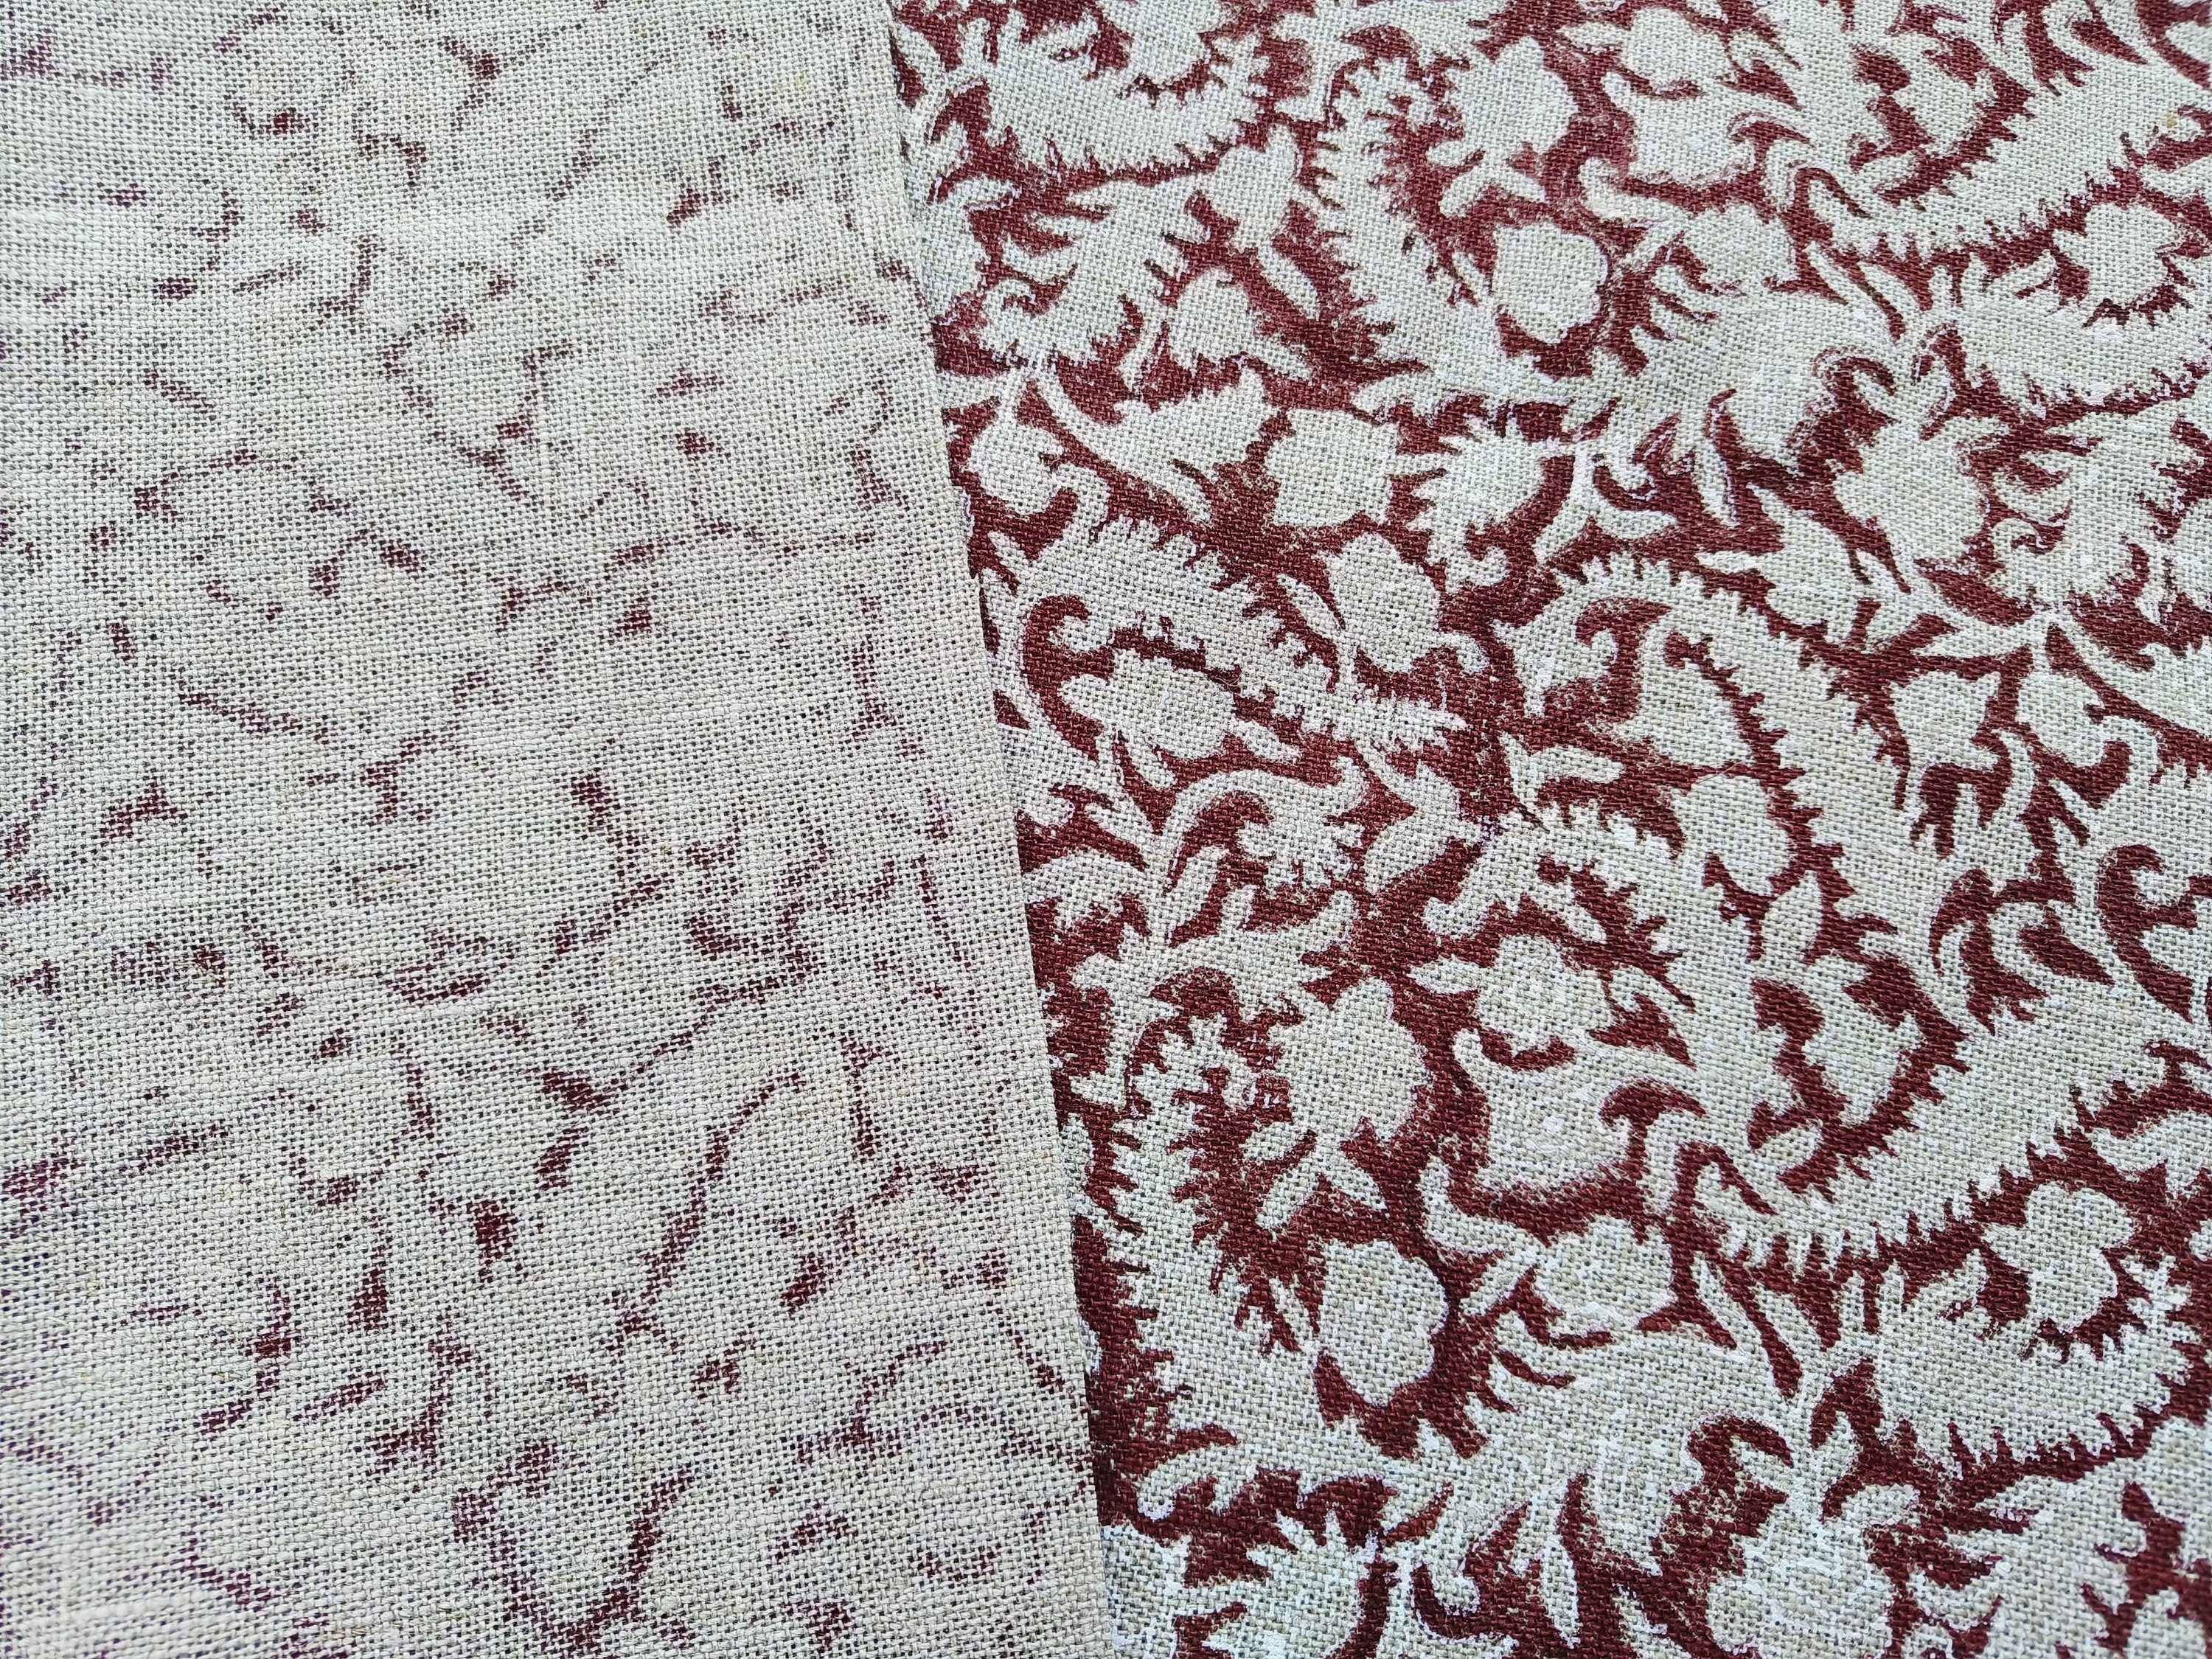 Black Forest  Handloom Block Print  Fabric, Indian Block Print,Fabric For Decorative Cushion,Upholstery Fabric,Fabric By Yard